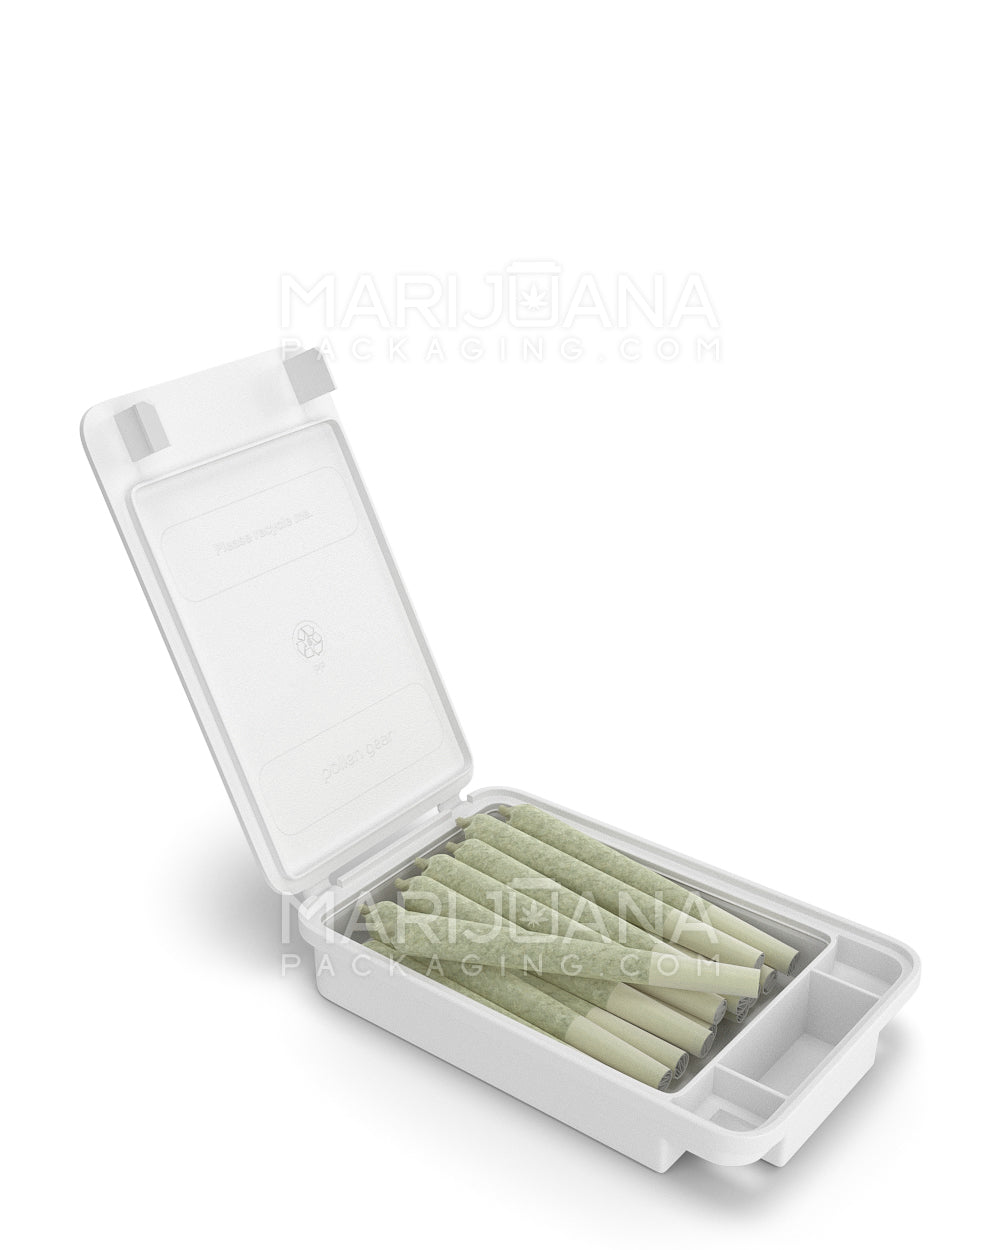 Child Resistant | Snap Box Edible & Pre-Roll Joint Case | Medium - White Plastic - 240 Count - 2